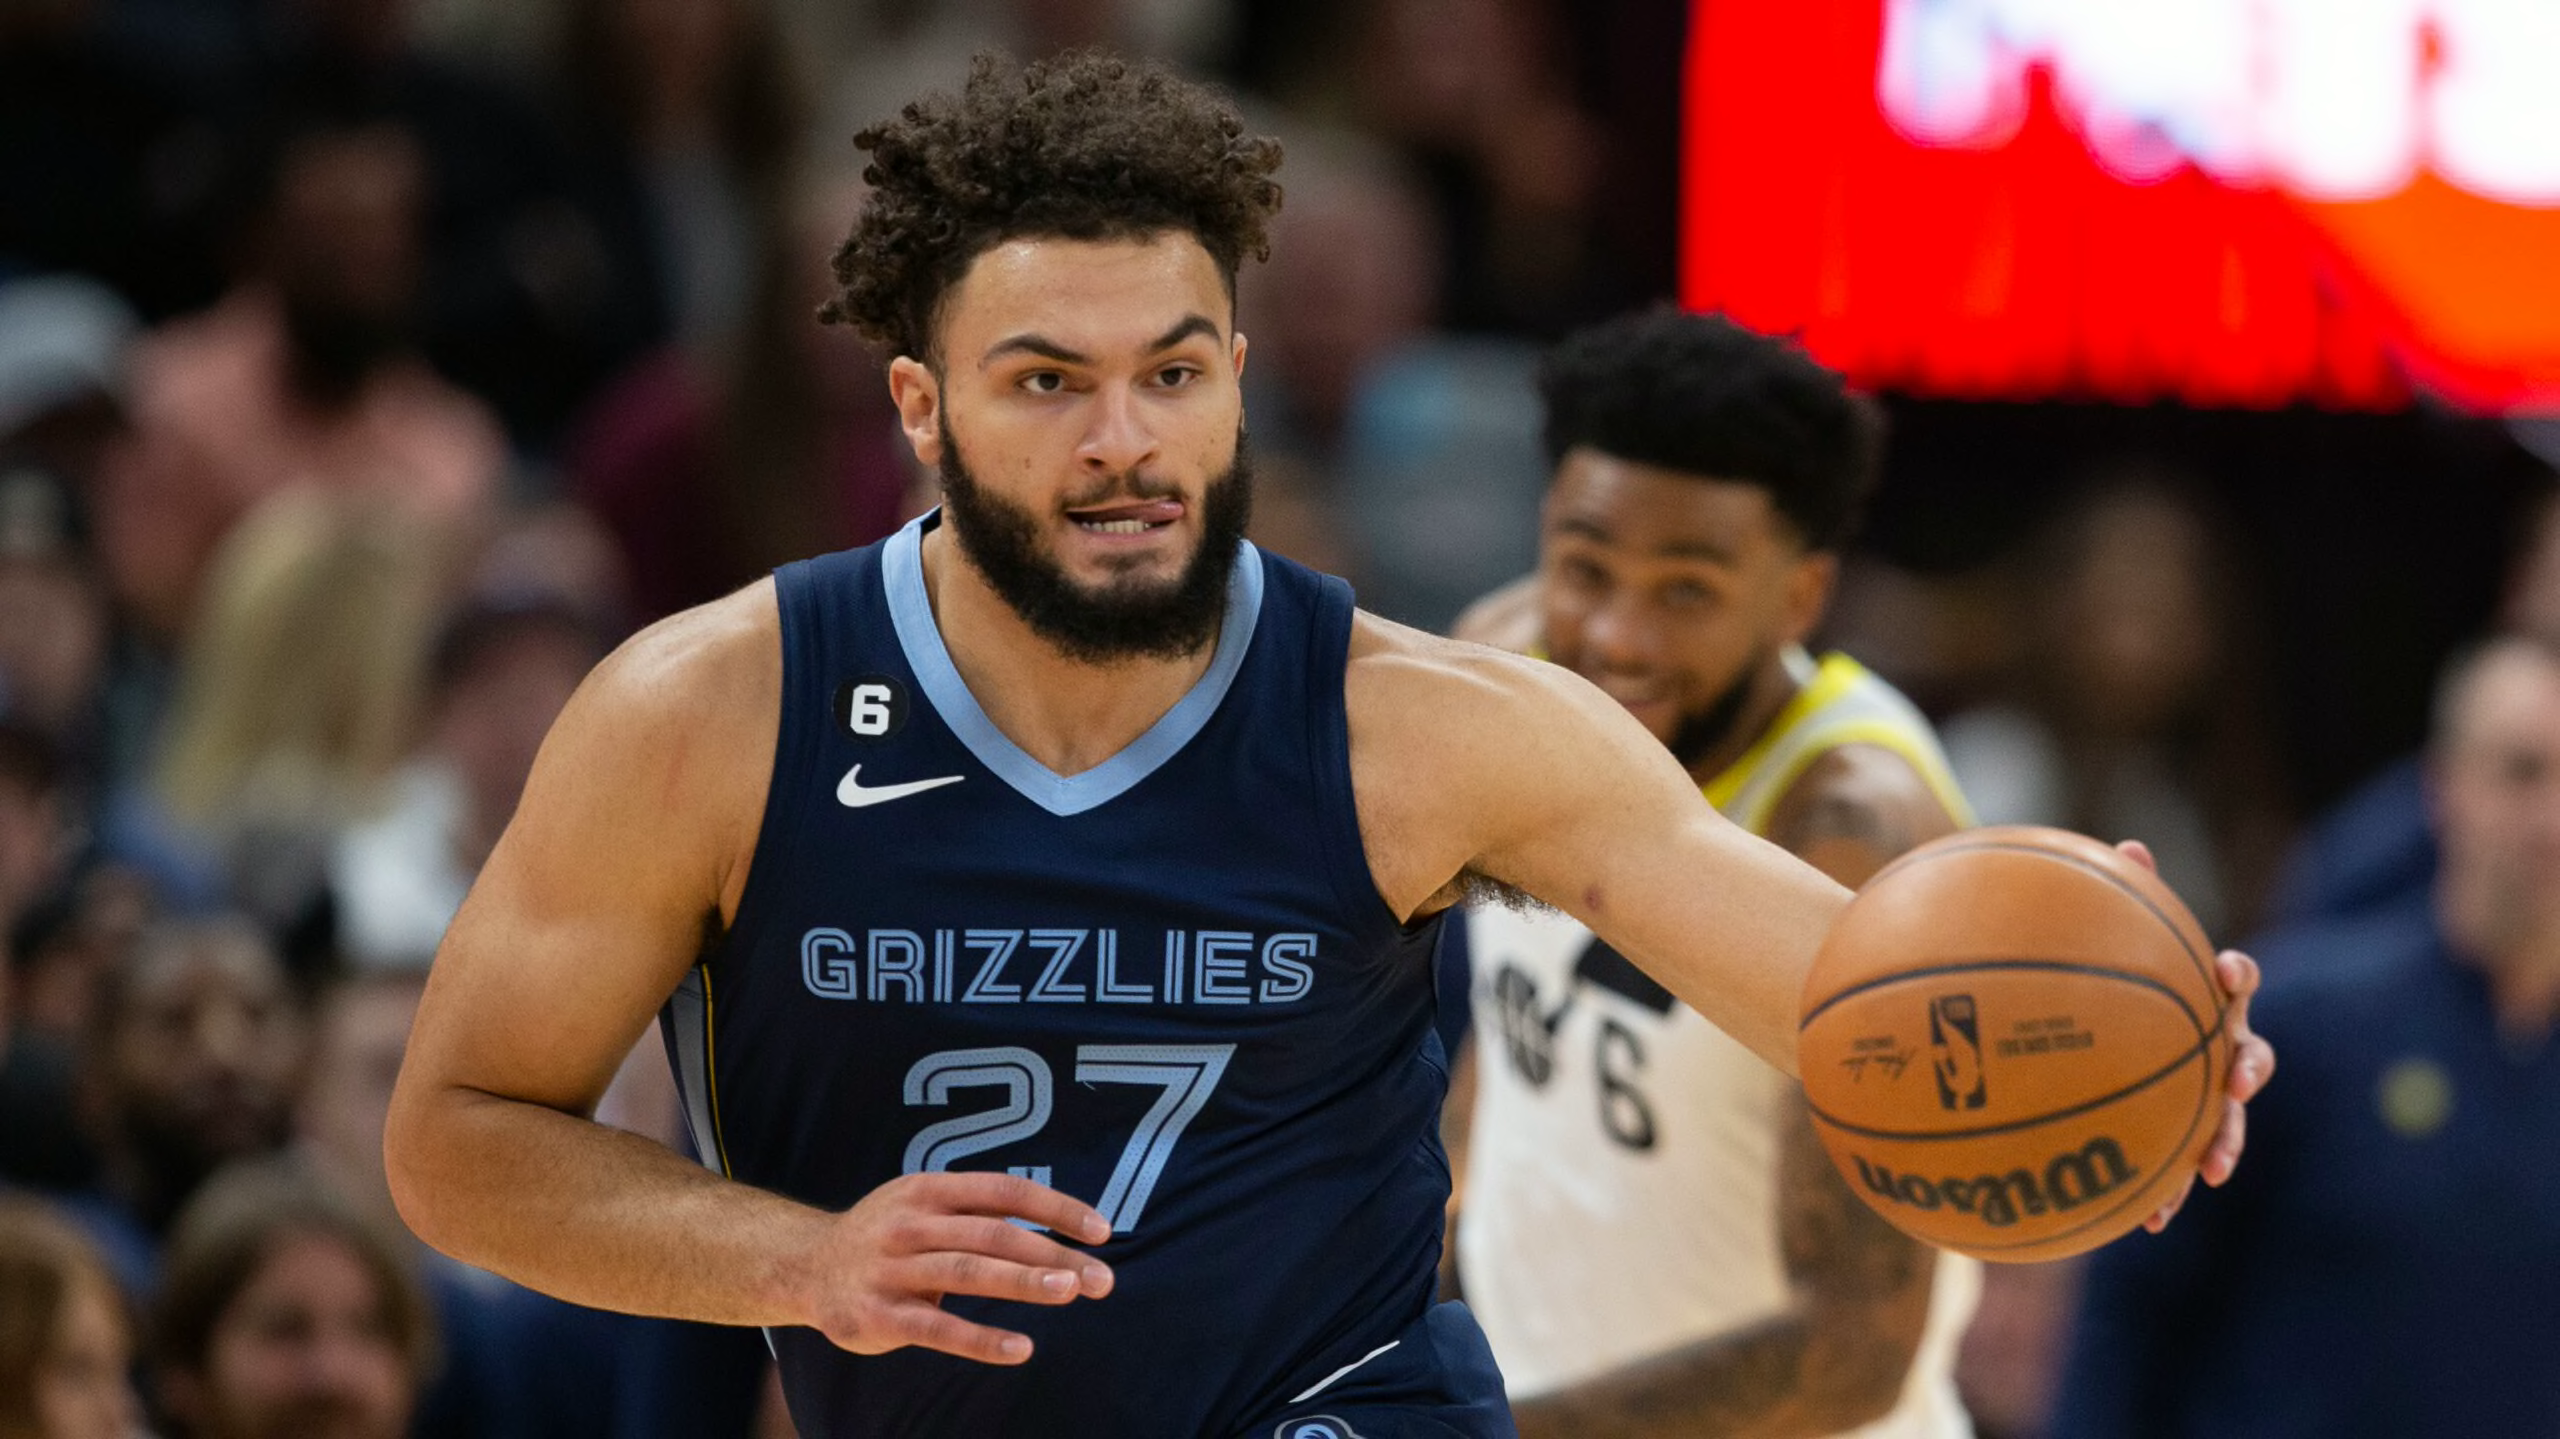 Grizzlies fan favorite David Roddy will be in the NBA 'a long time